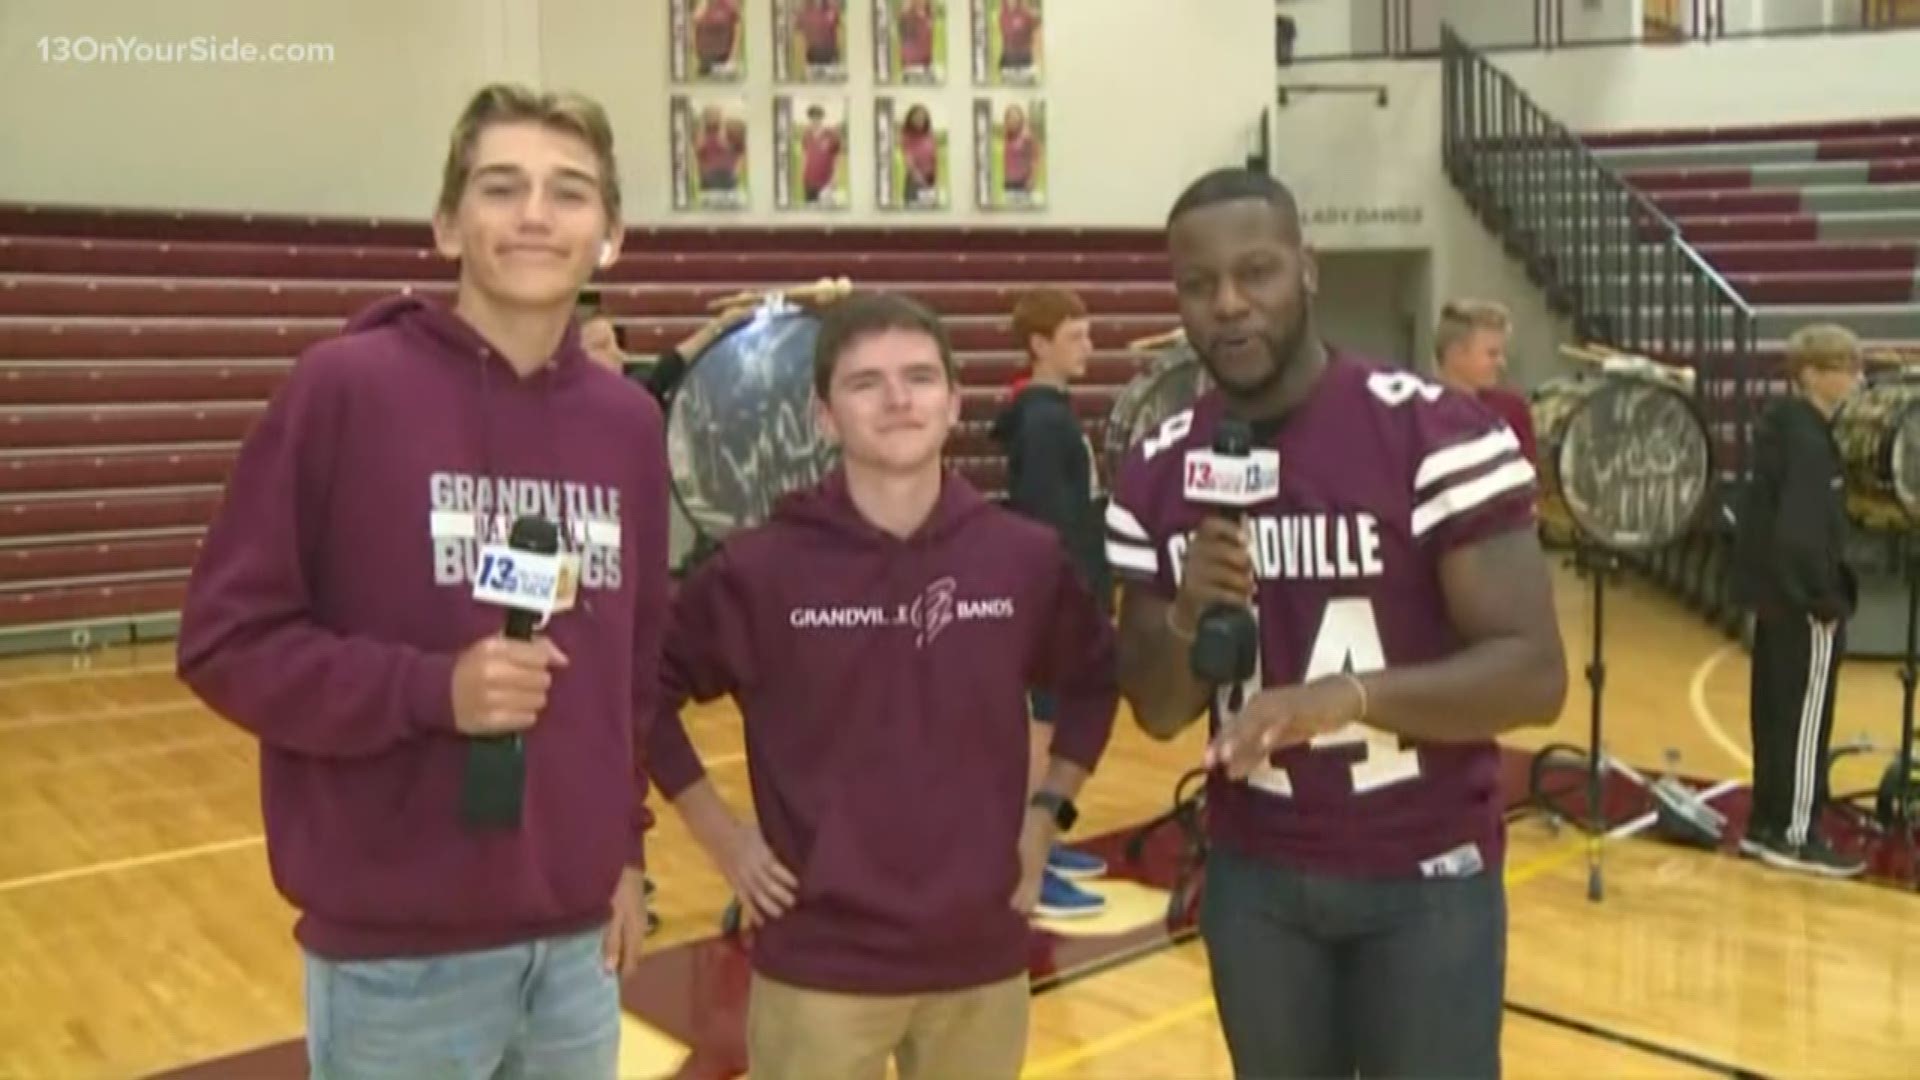 James and co-host Ian interview Ben, from the Grandville High School band.